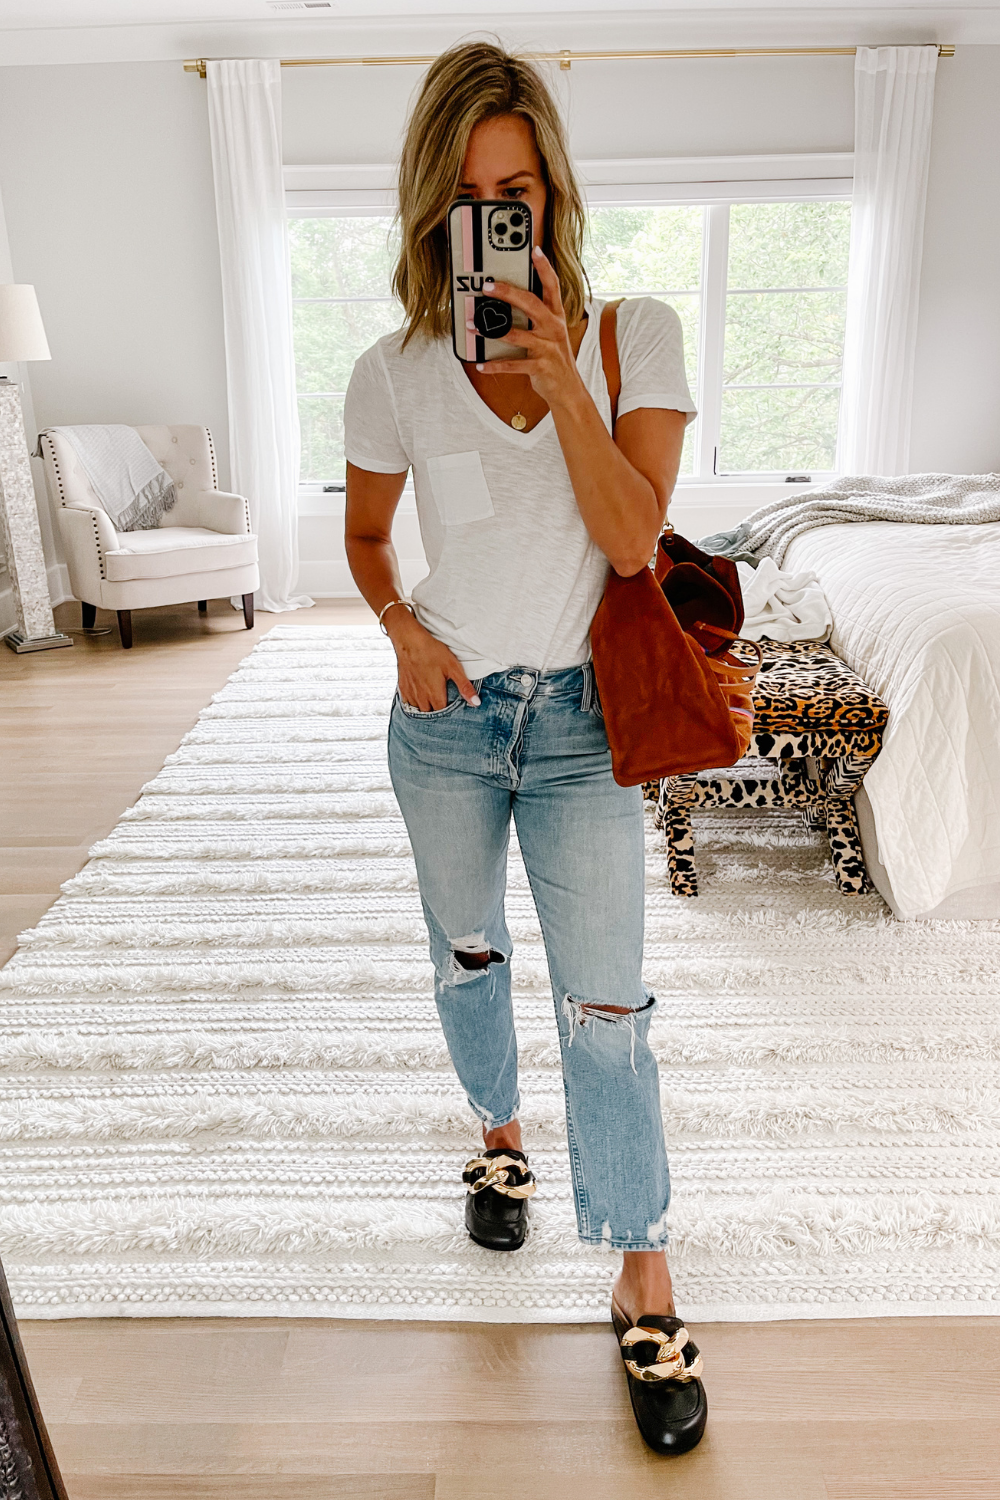 Suzanne wearing a white t-shirt and distressed denim